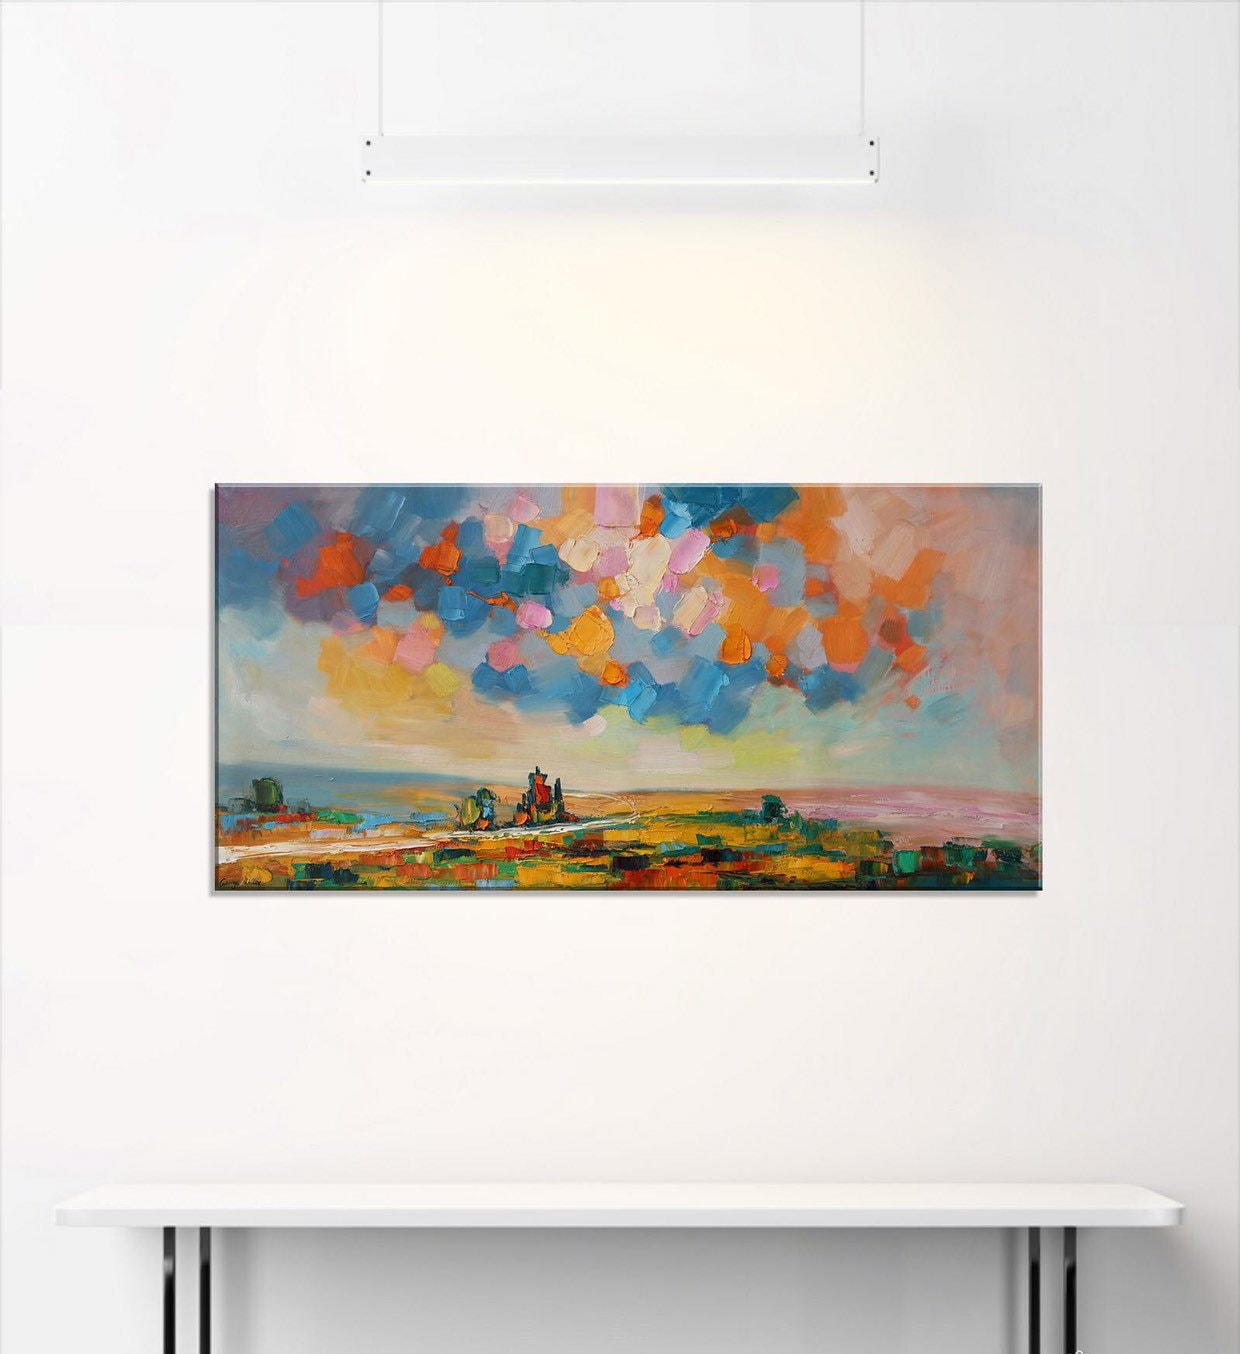 Abstract Painting, Landscape Painting, Spring, Abstract Canvas Art, Original Abstract Painting, Wall Art, Abstract Oil Painting, Modern Art